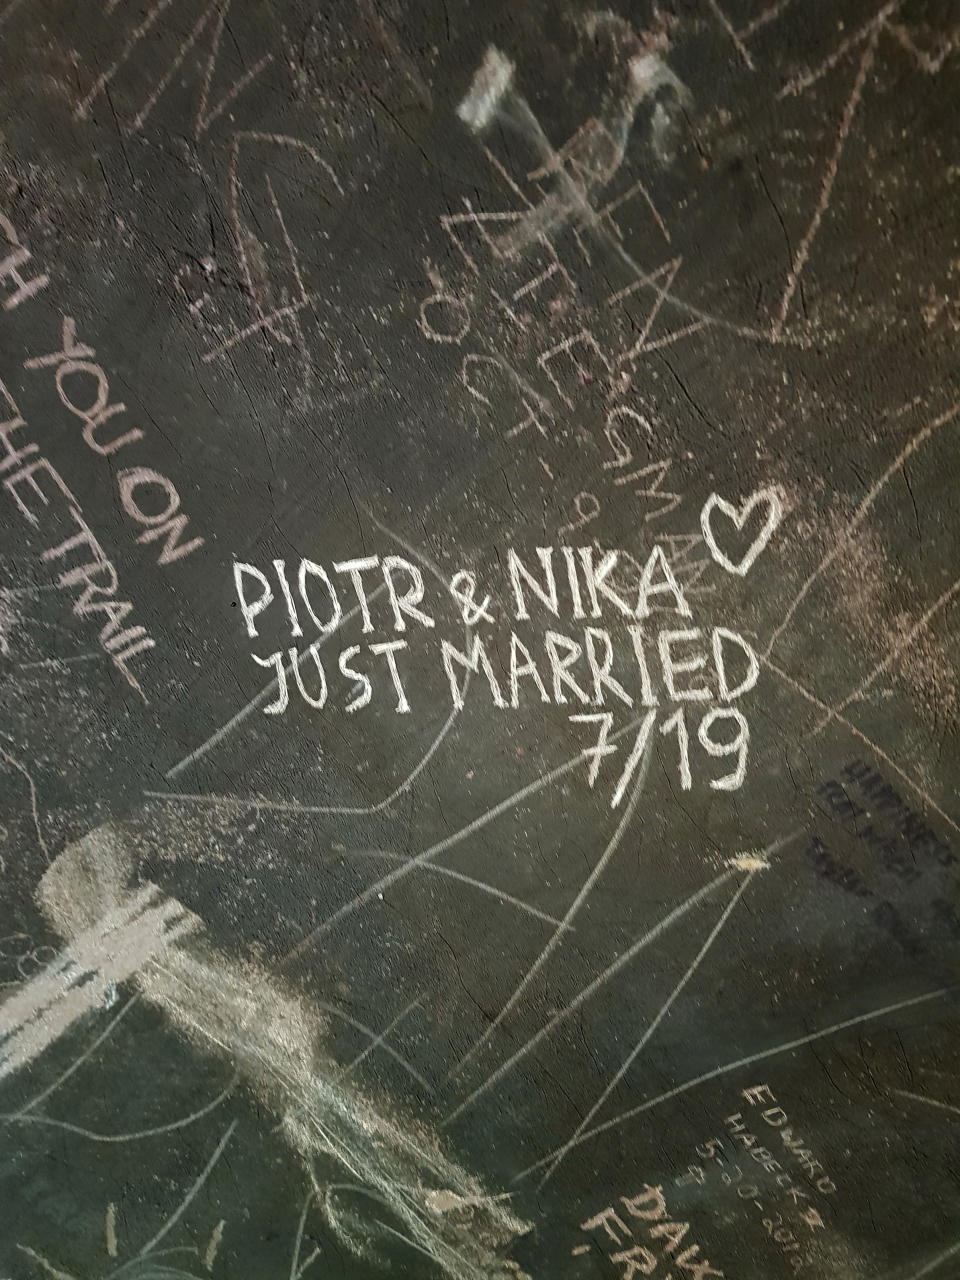 This undated photo provided by Piotr Markielau shows what he and his wife, Veranika Nikonova, scratched on an abandoned bus in the Alaska wilderness shortly before she died on July 25, 2019, following her struggle to cross the Teklanika River. Markielau said he frantically tried but failed to save his wife as she struggled to cross the river near a bus in the Alaska wilderness made famous by the movie "Into the Wild." (Piotr Markielau via AP)